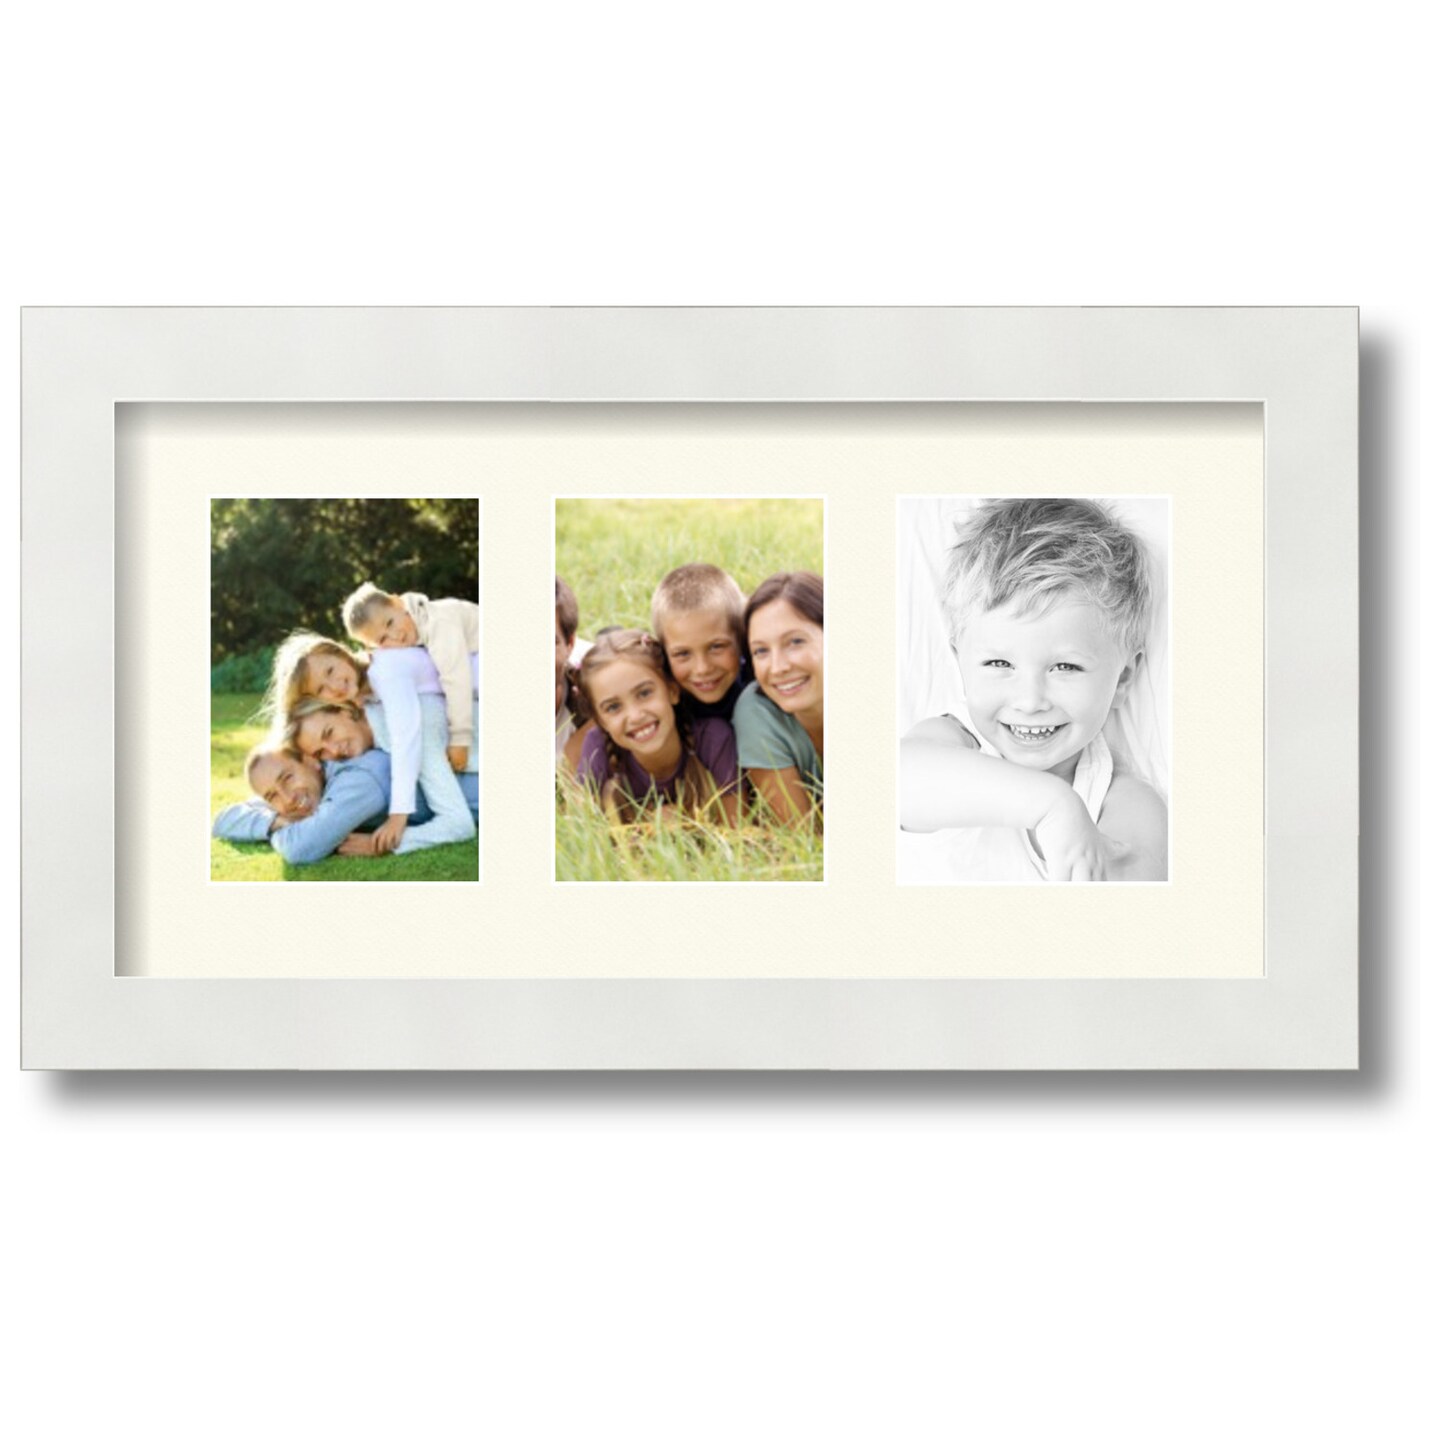 Mainstays 7-Opening 4 x 6 Wide Bevel Black Collage Picture Frame